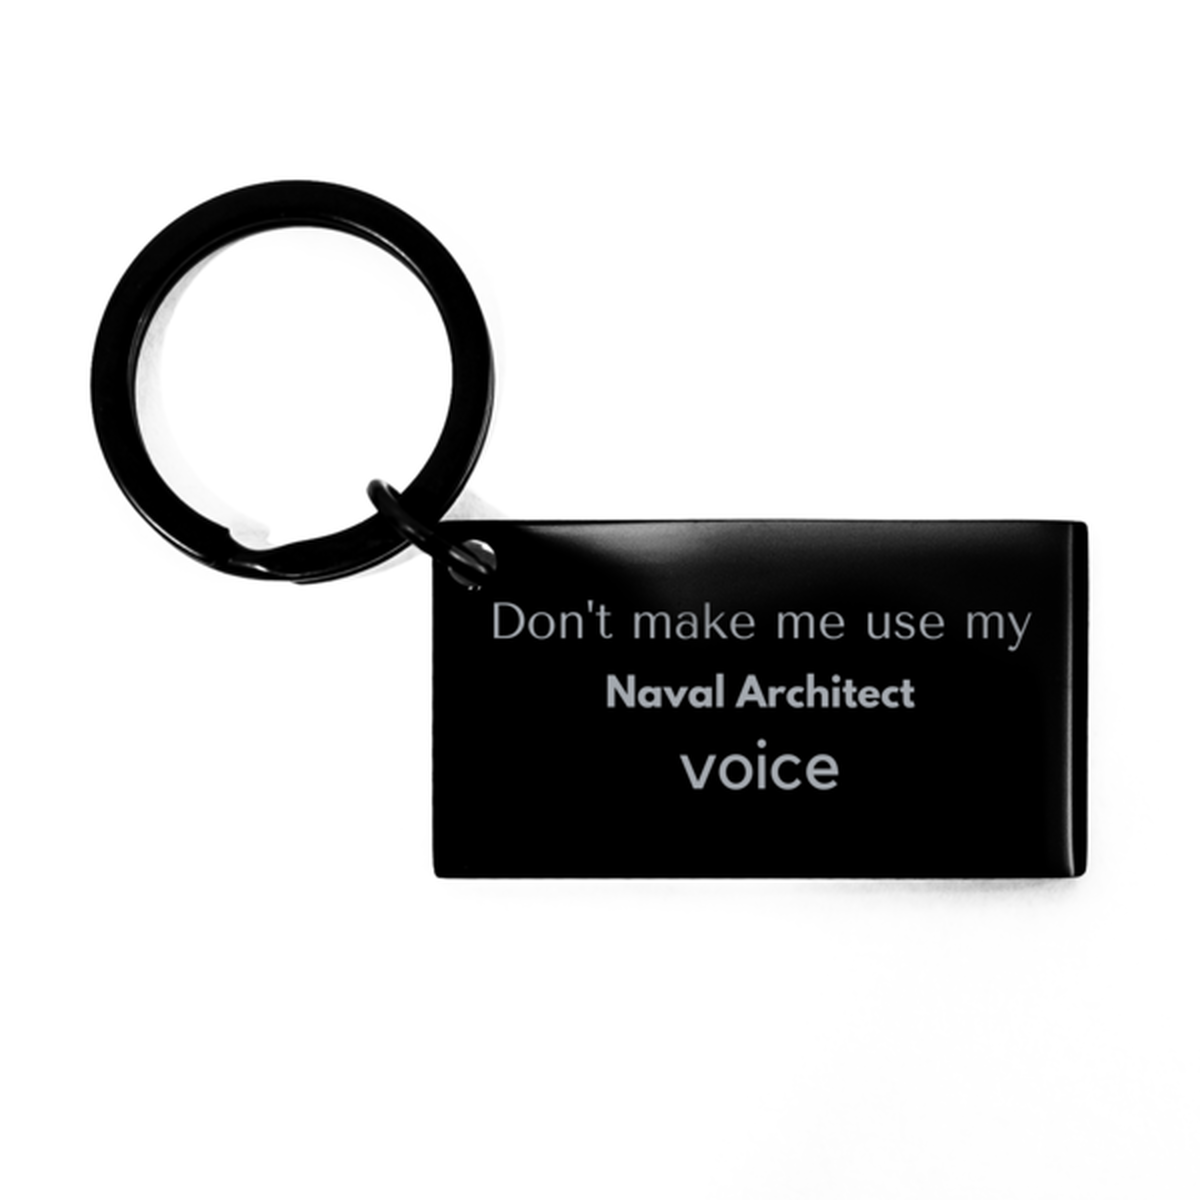 Don't make me use my Naval Architect voice, Sarcasm Naval Architect Gifts, Christmas Naval Architect Keychain Birthday Unique Gifts For Naval Architect Coworkers, Men, Women, Colleague, Friends